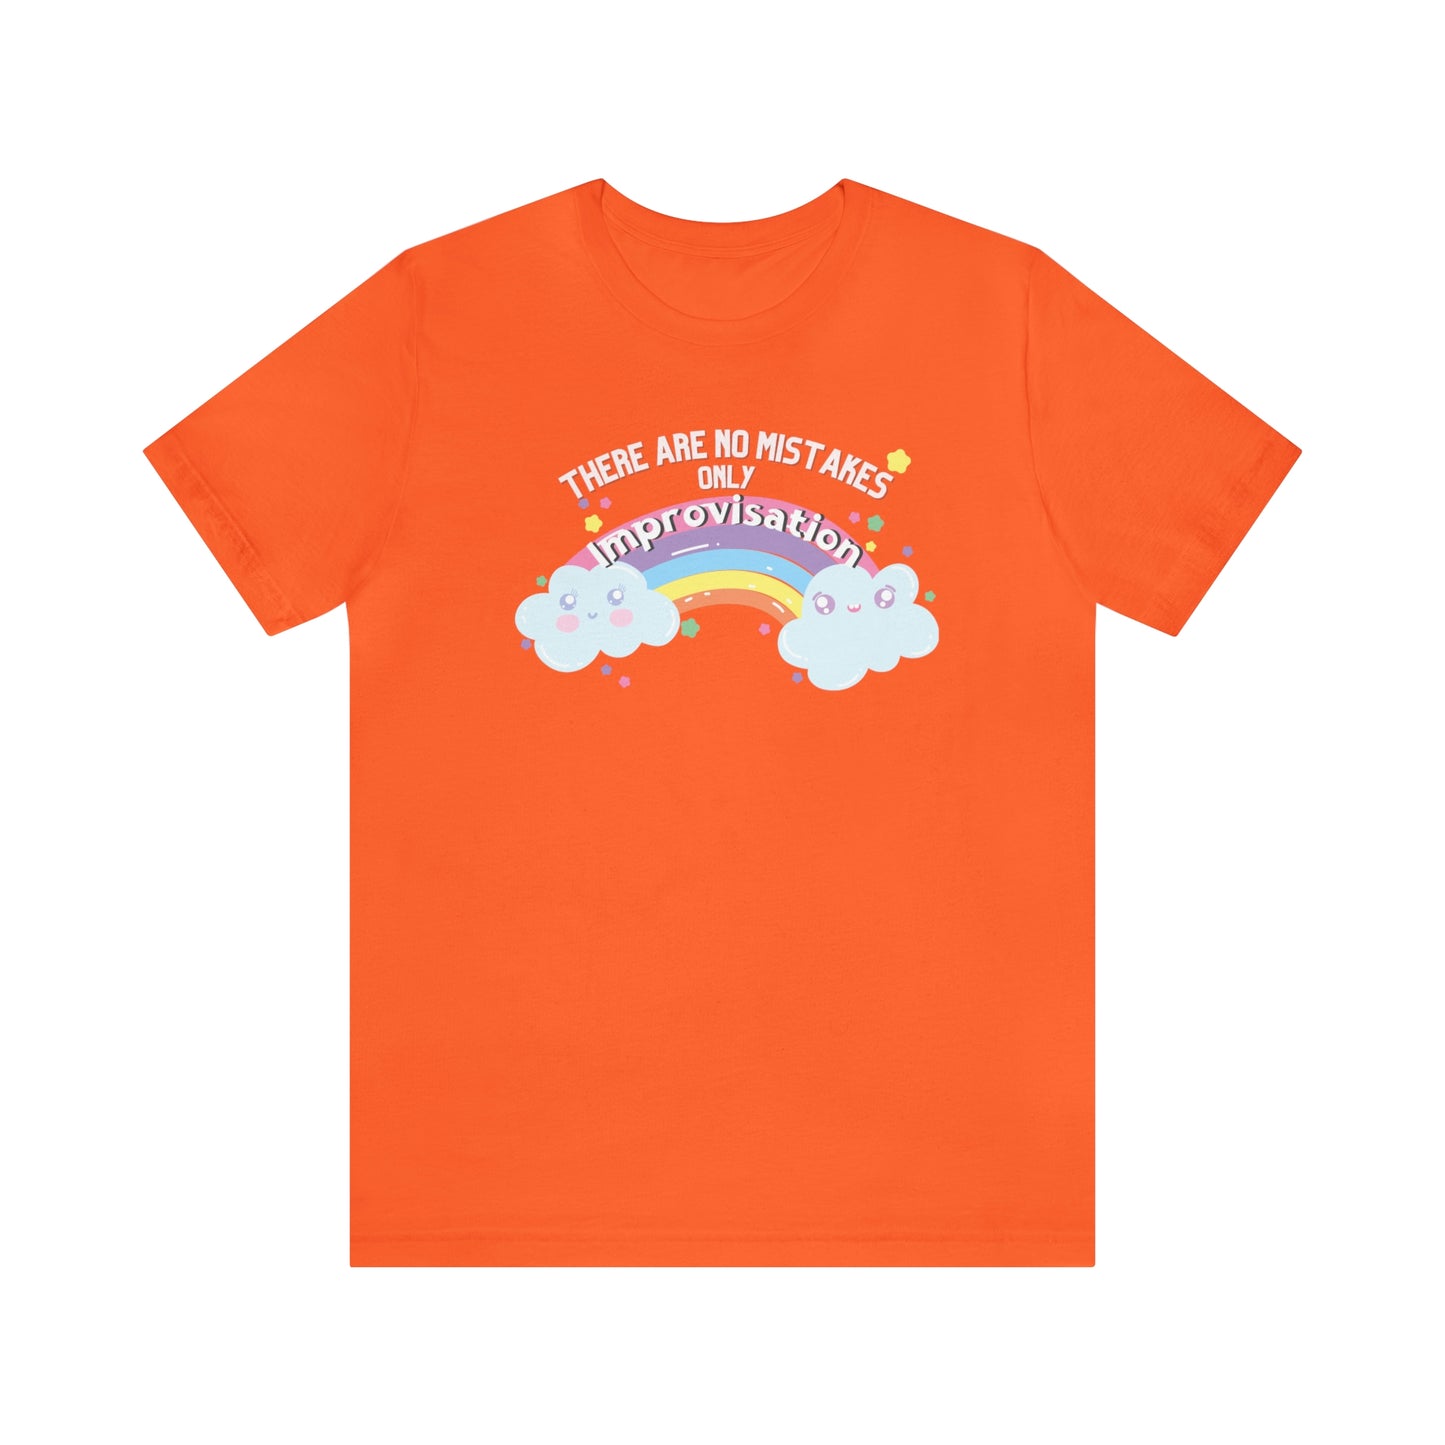 Funny dance tshirt with the text "there are no mistakes only improvisation" and two happy clouds connected by a rainbow